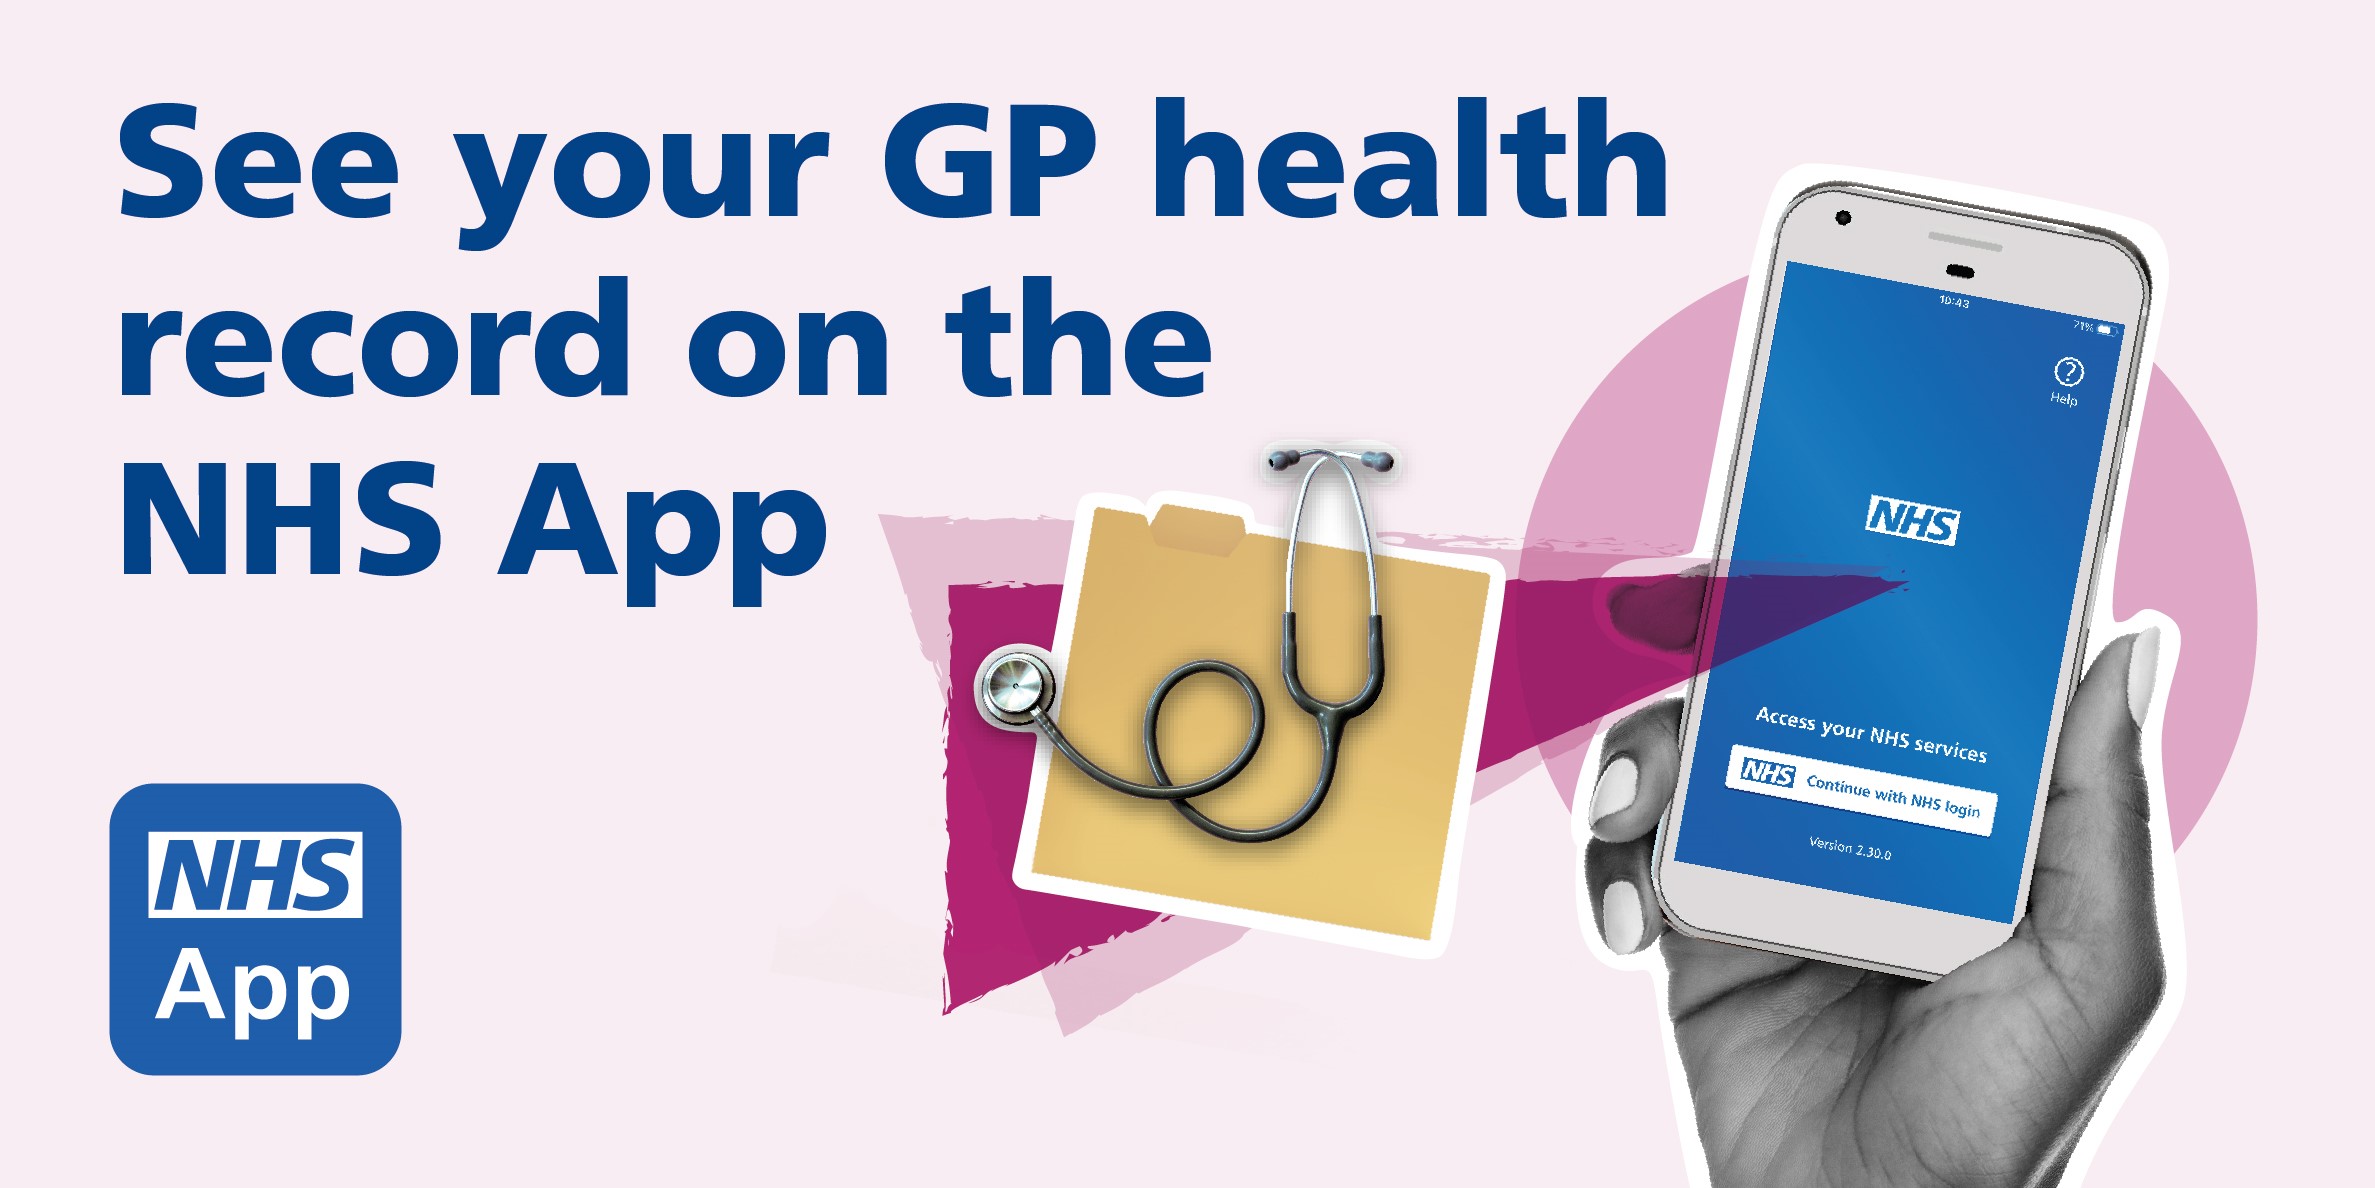 See your GP health record on the NHS App